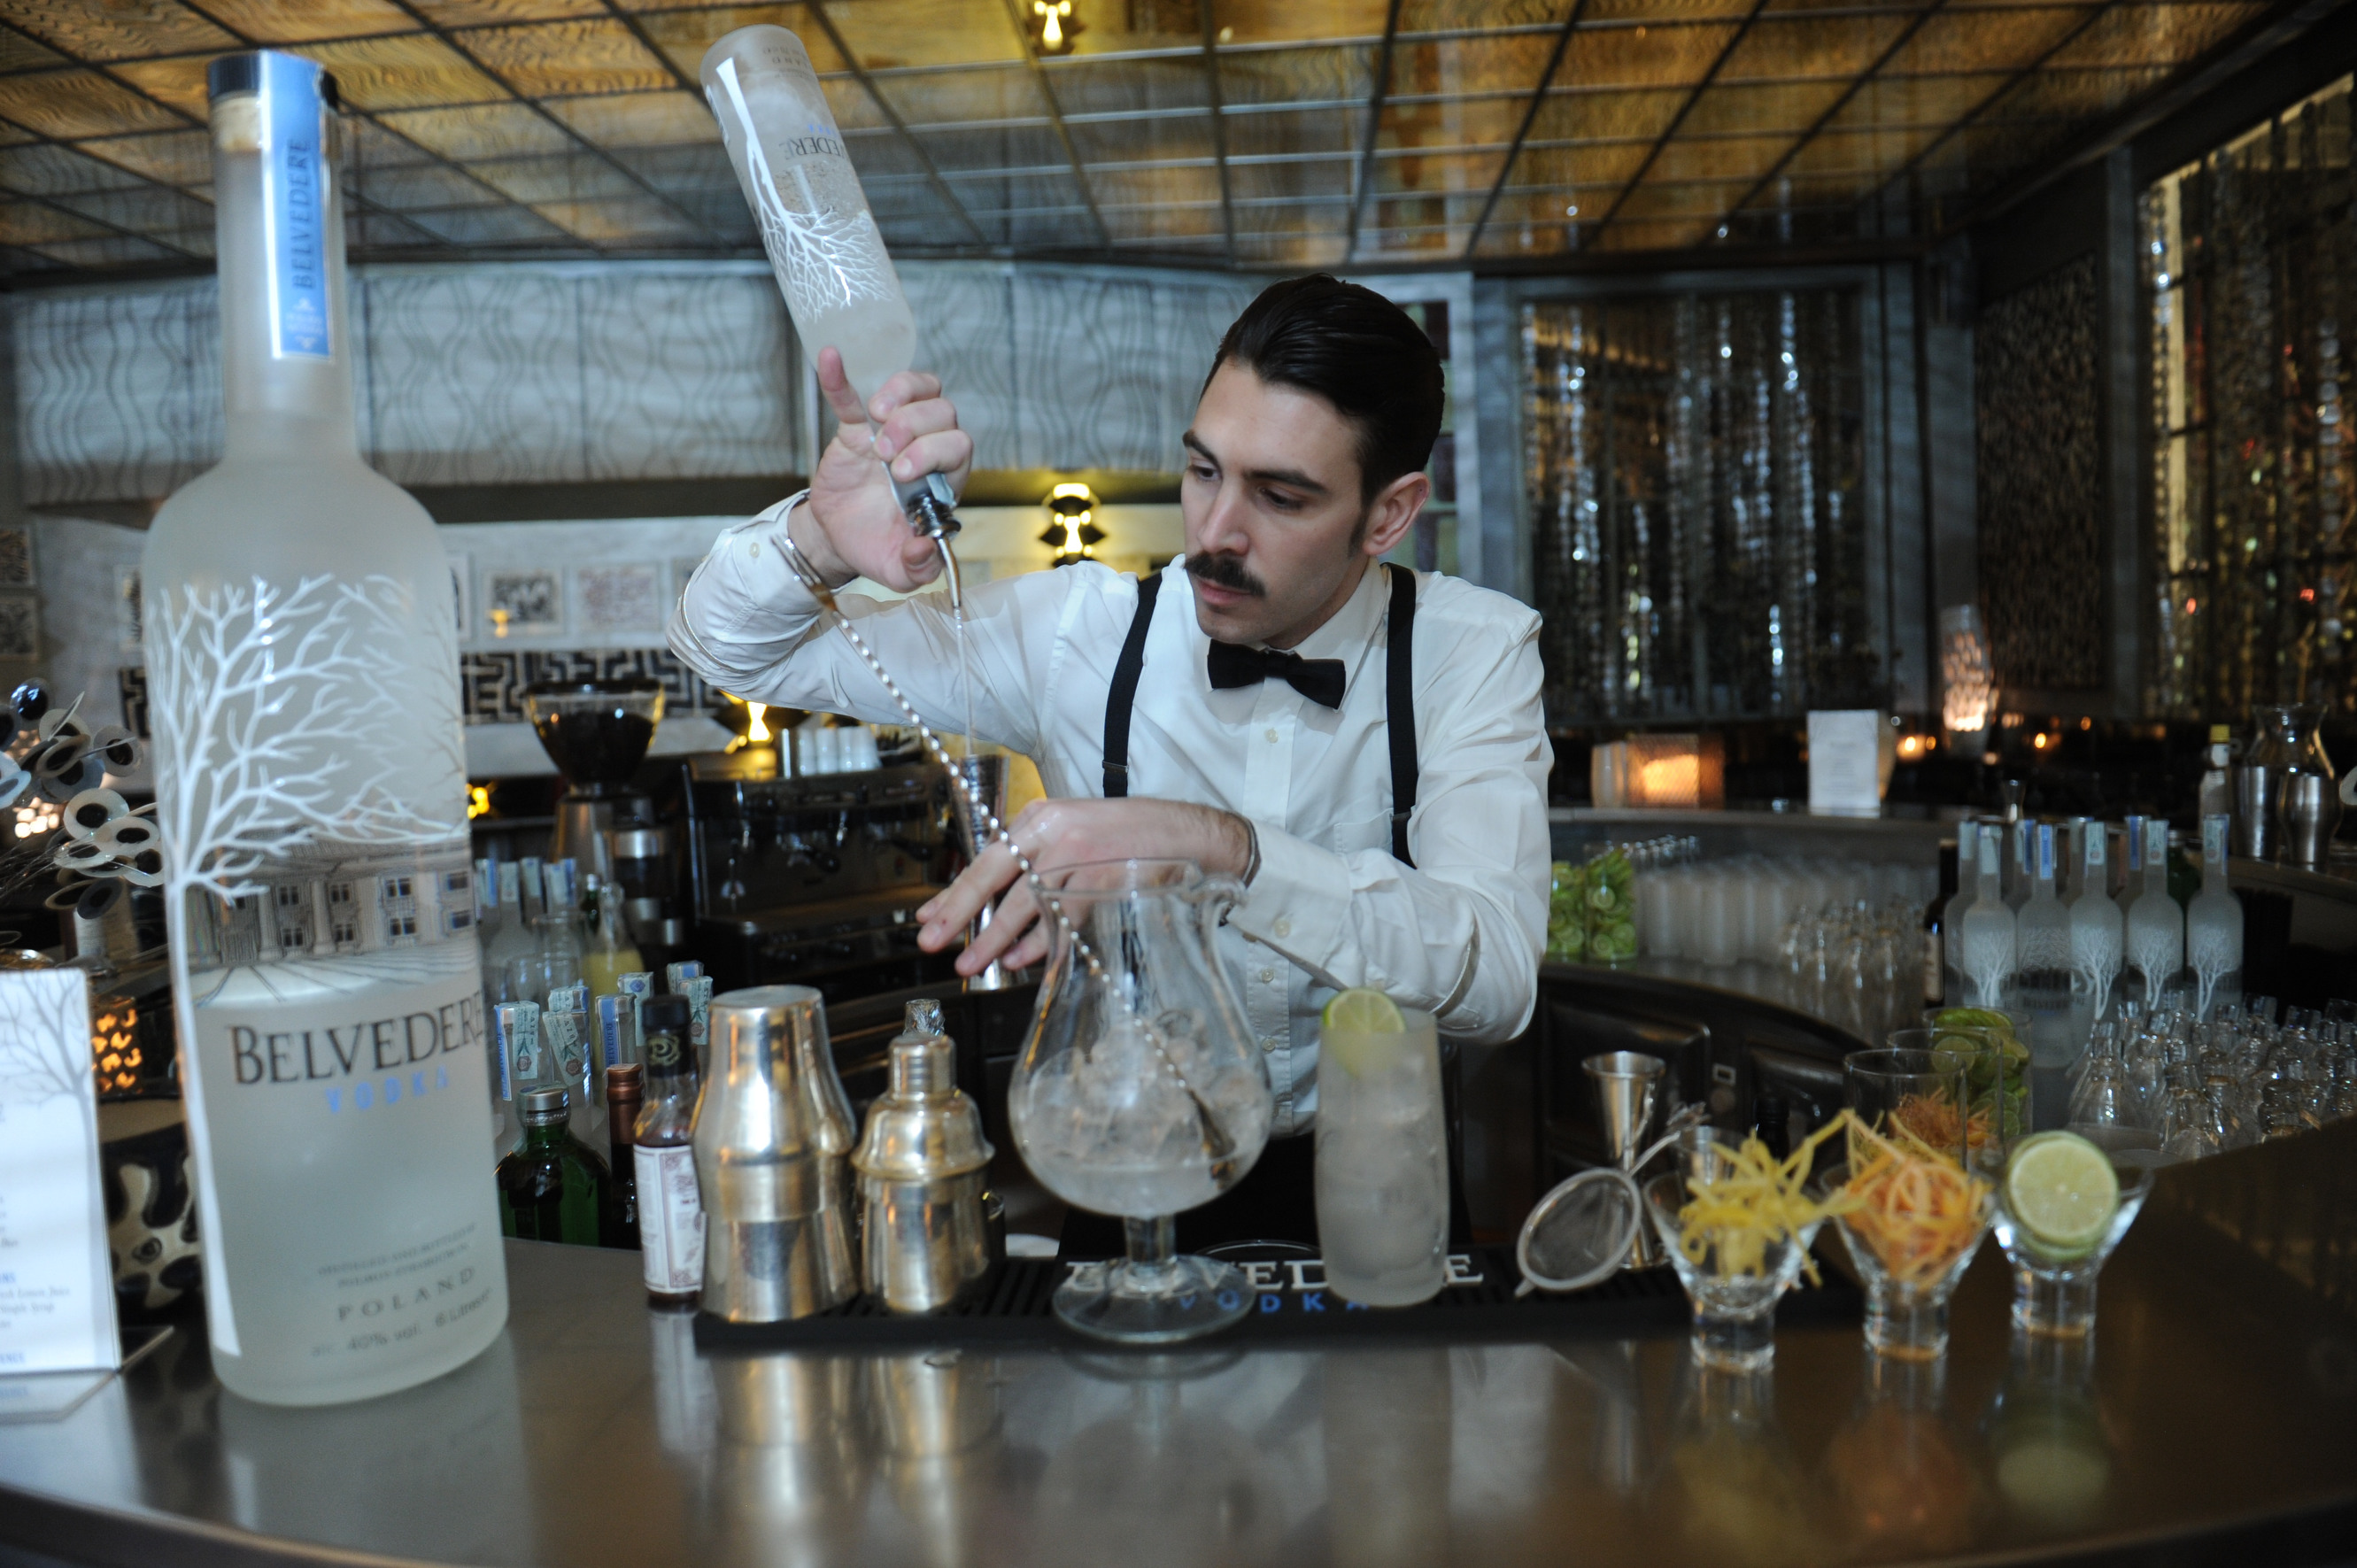 Belvedere Know the Difference event_bartender at work (photo by SGP Italia)